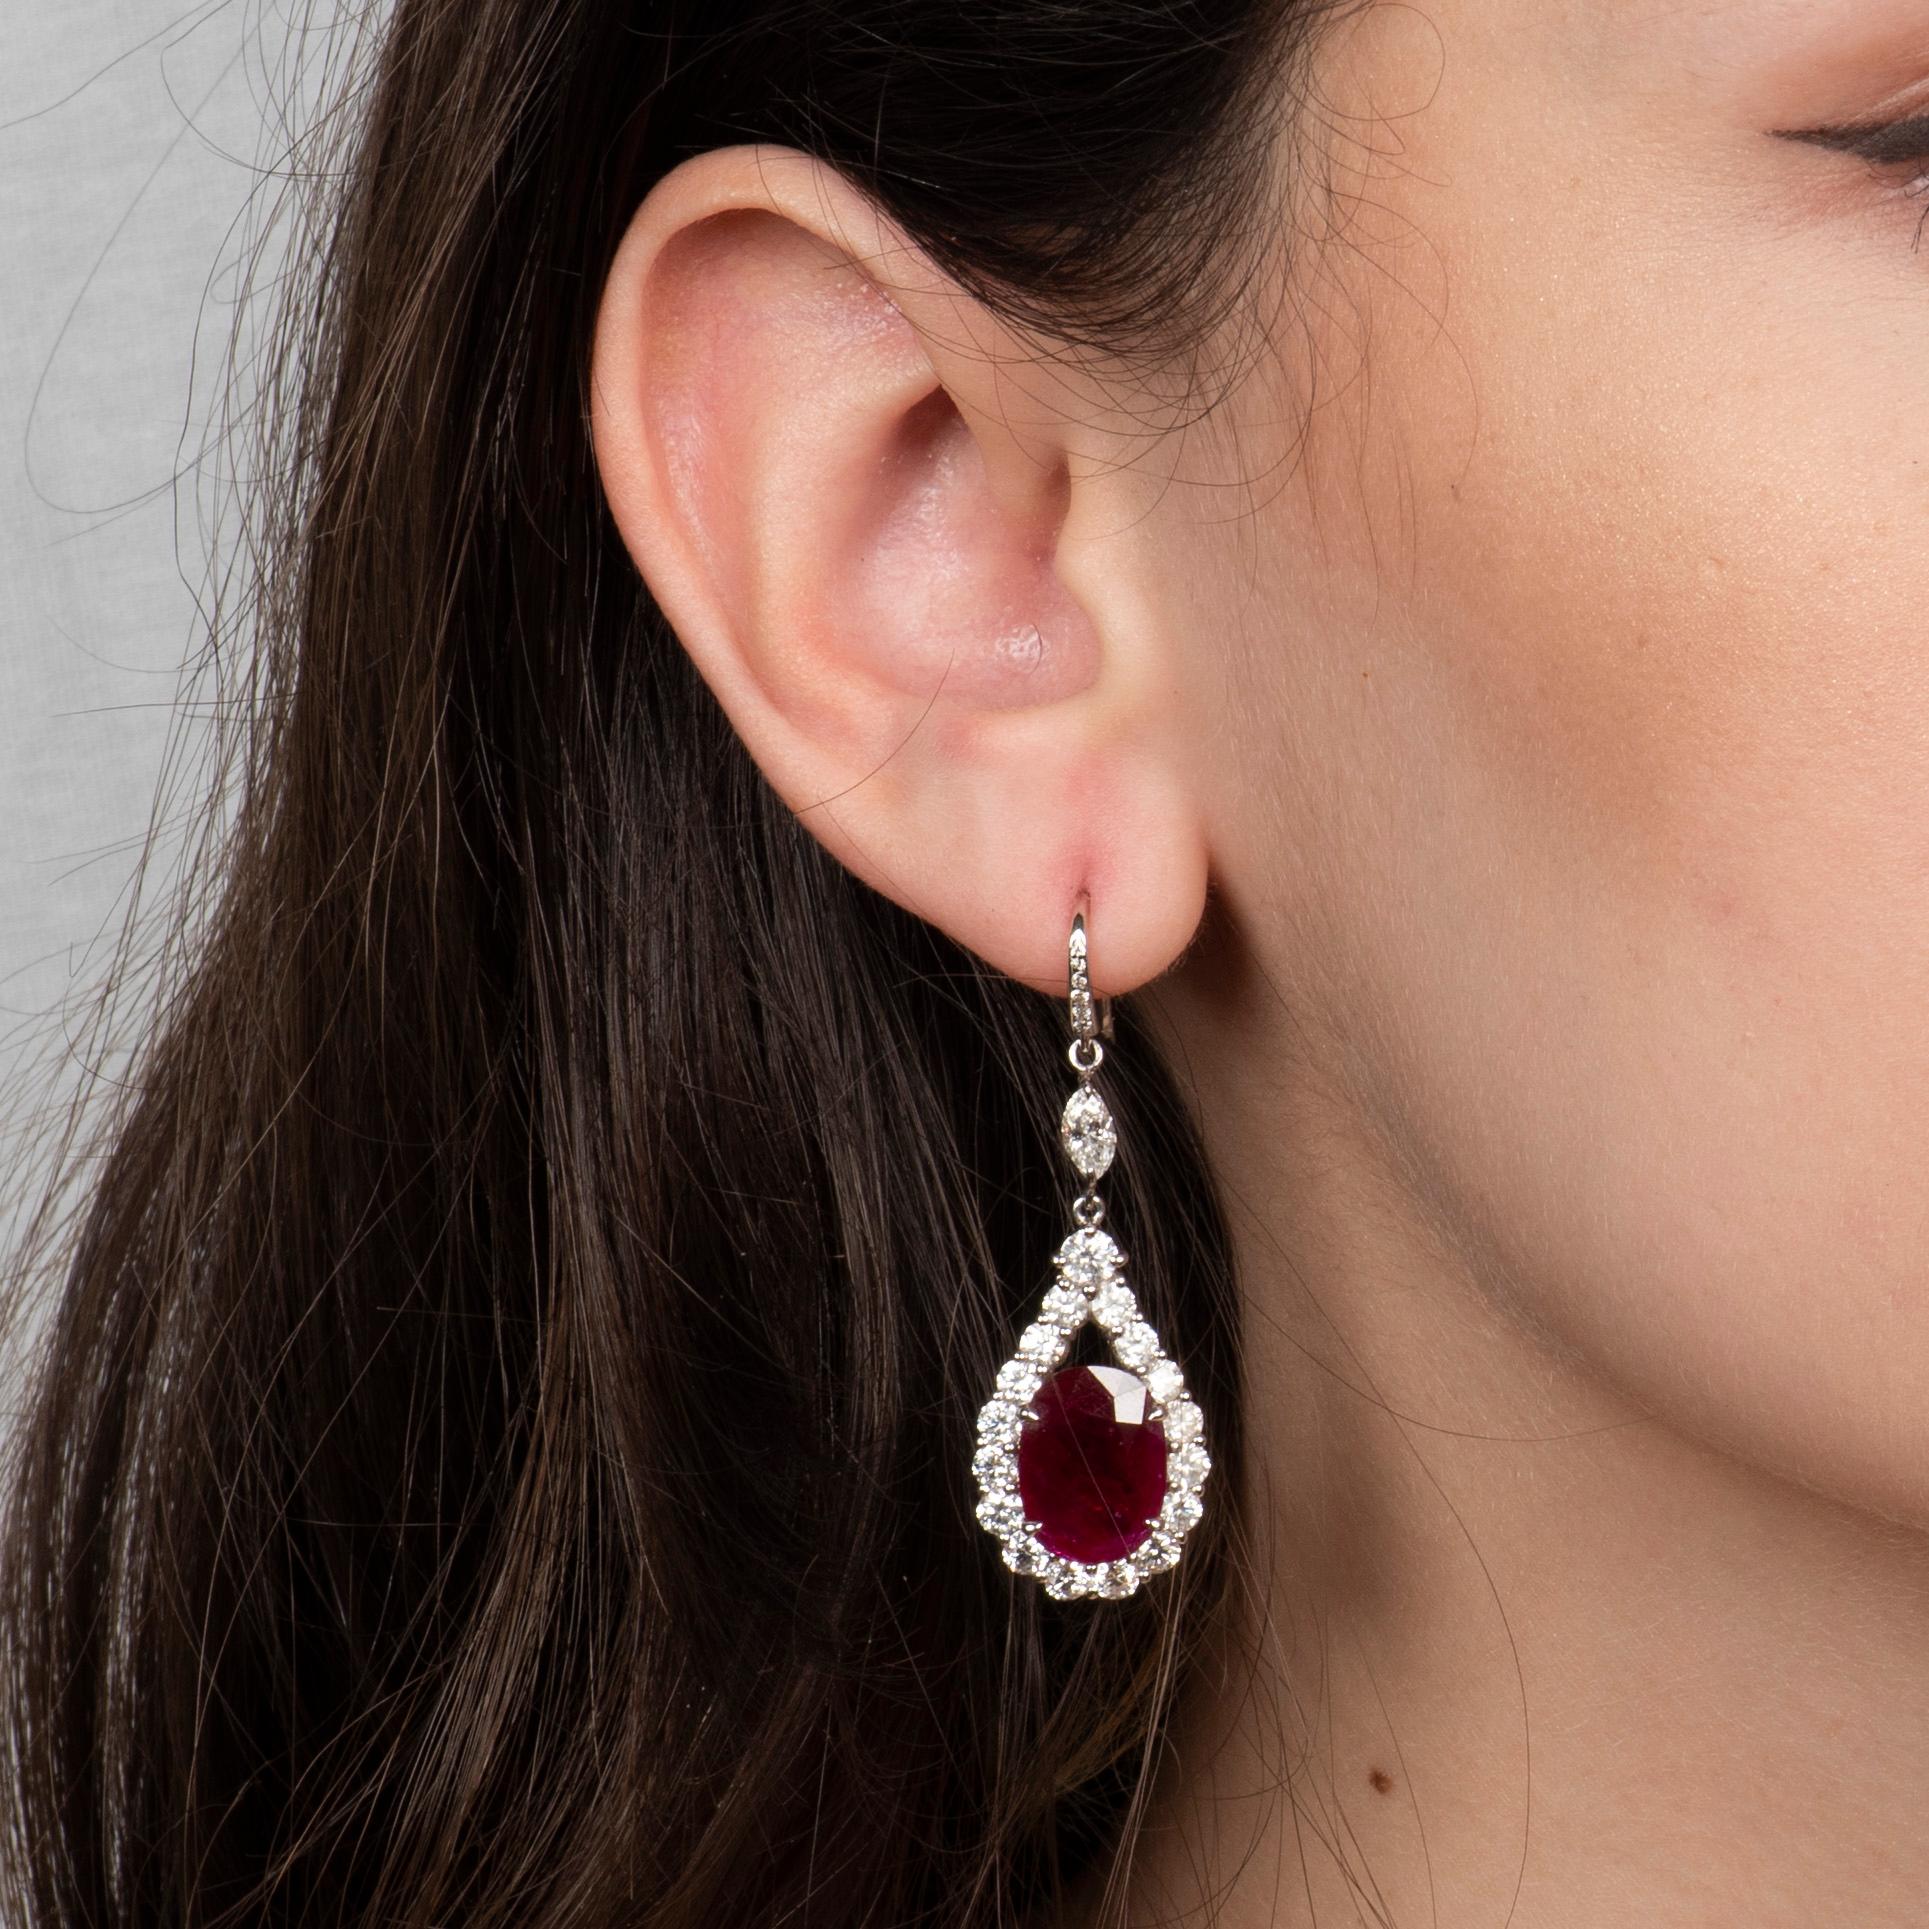 These gorgeous 11.85ctw natural oval cut rubies are surrounded by 4.49ctw in fine white round diamonds forming the halo in a pear form. These dangle earrings have great fluidity and swing freely, catching the light. They are set in 18kt white gold.